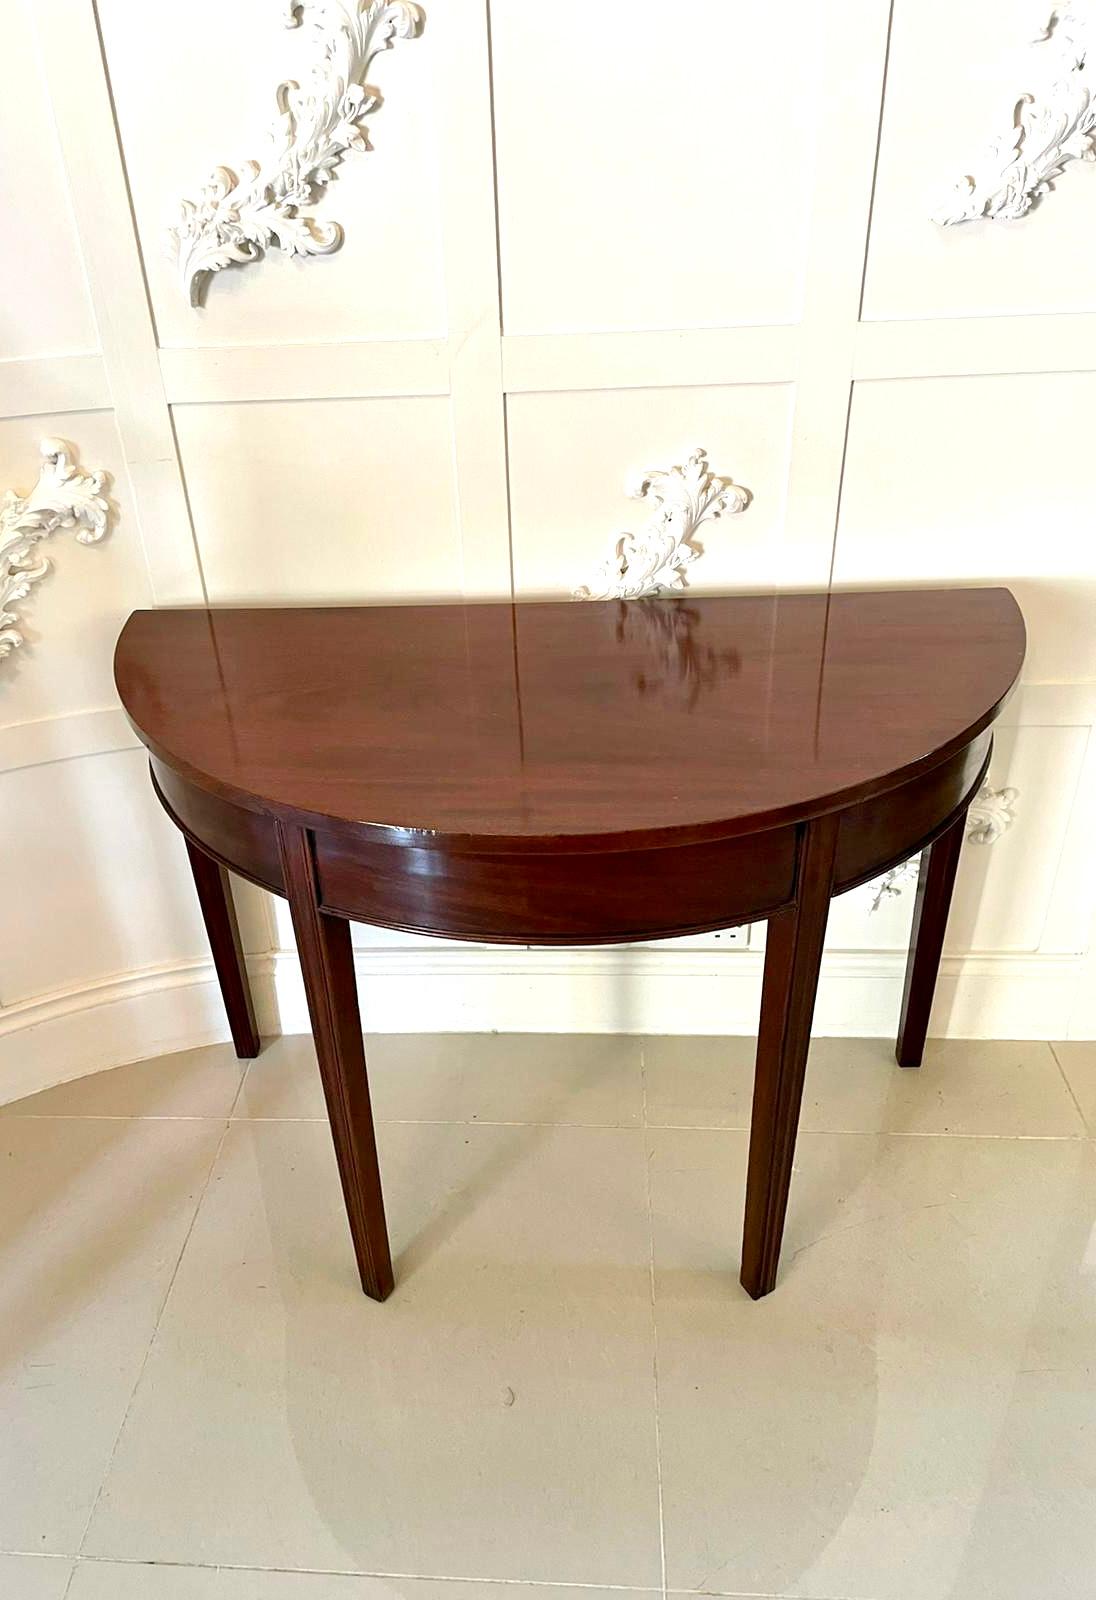 Antique George III mahogany demi-lune console table having a quality mahogany top, mahogany frieze with a moulded edge and standing on elegant square tapering reeded legs.

In very desirable original condition with an attractive colour and